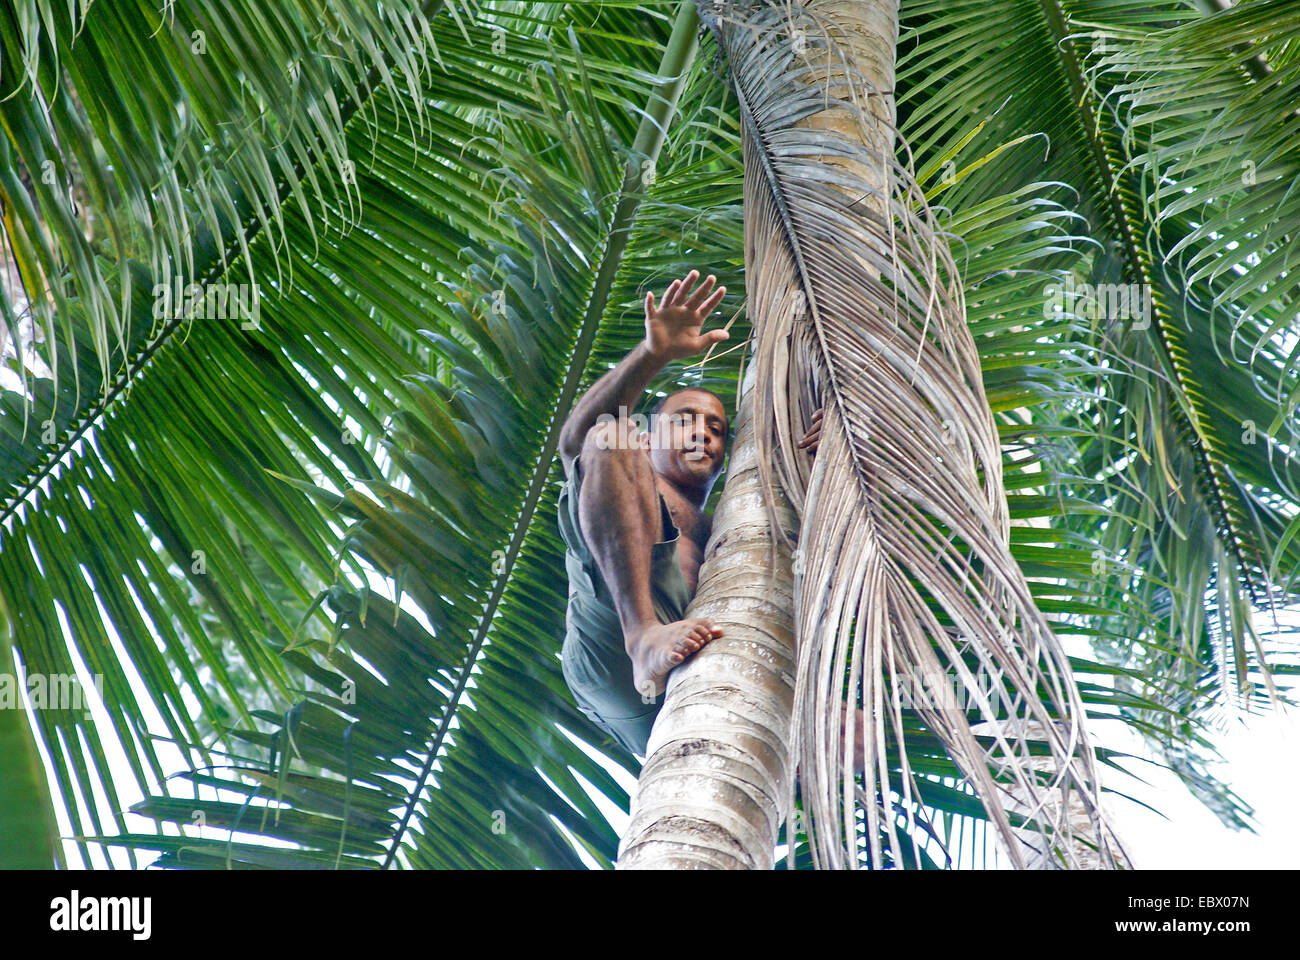 Cuban man with six fingers climbs up a coconut tree Stock Photo